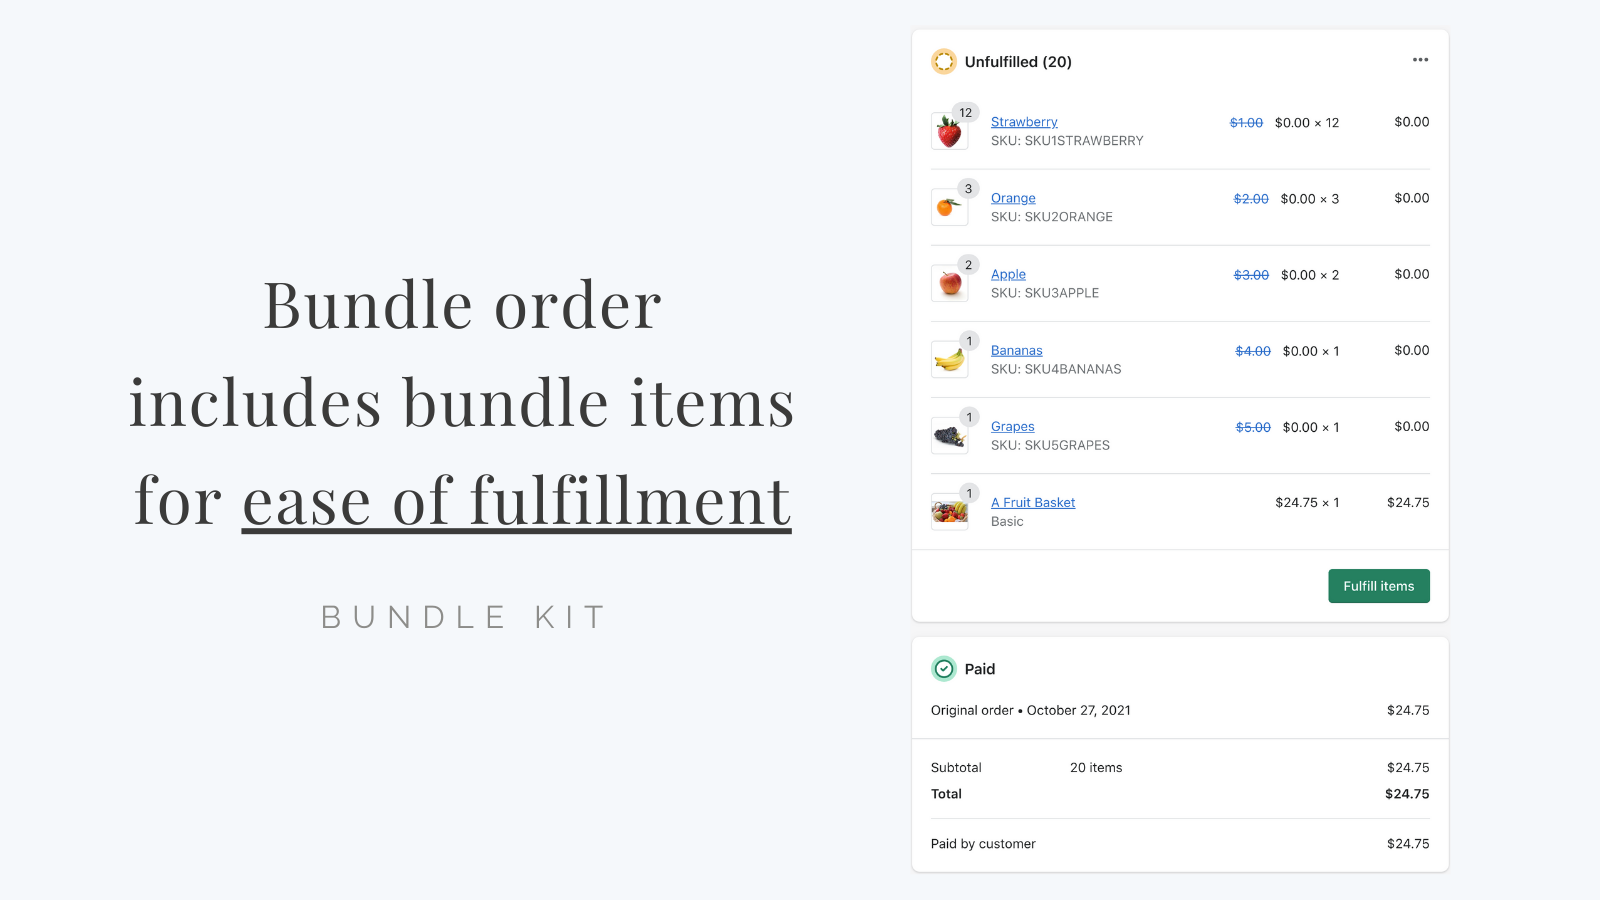 Bundle order includes bundle items for ease of fulfillment